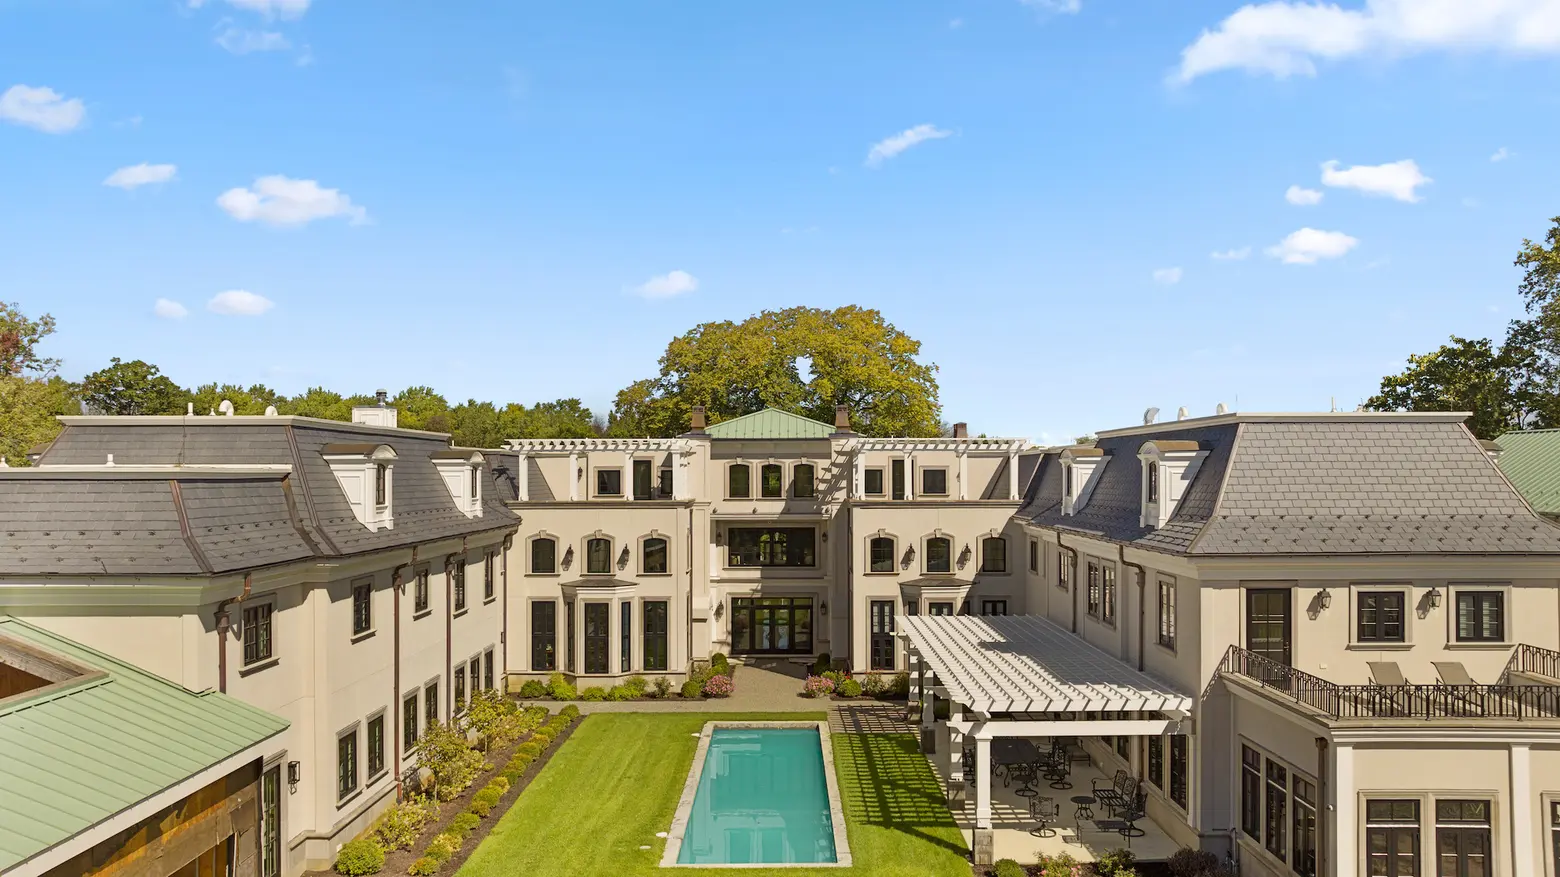 South Jersey mega-mansion comes unfinished with a record-breaking asking price of $25M